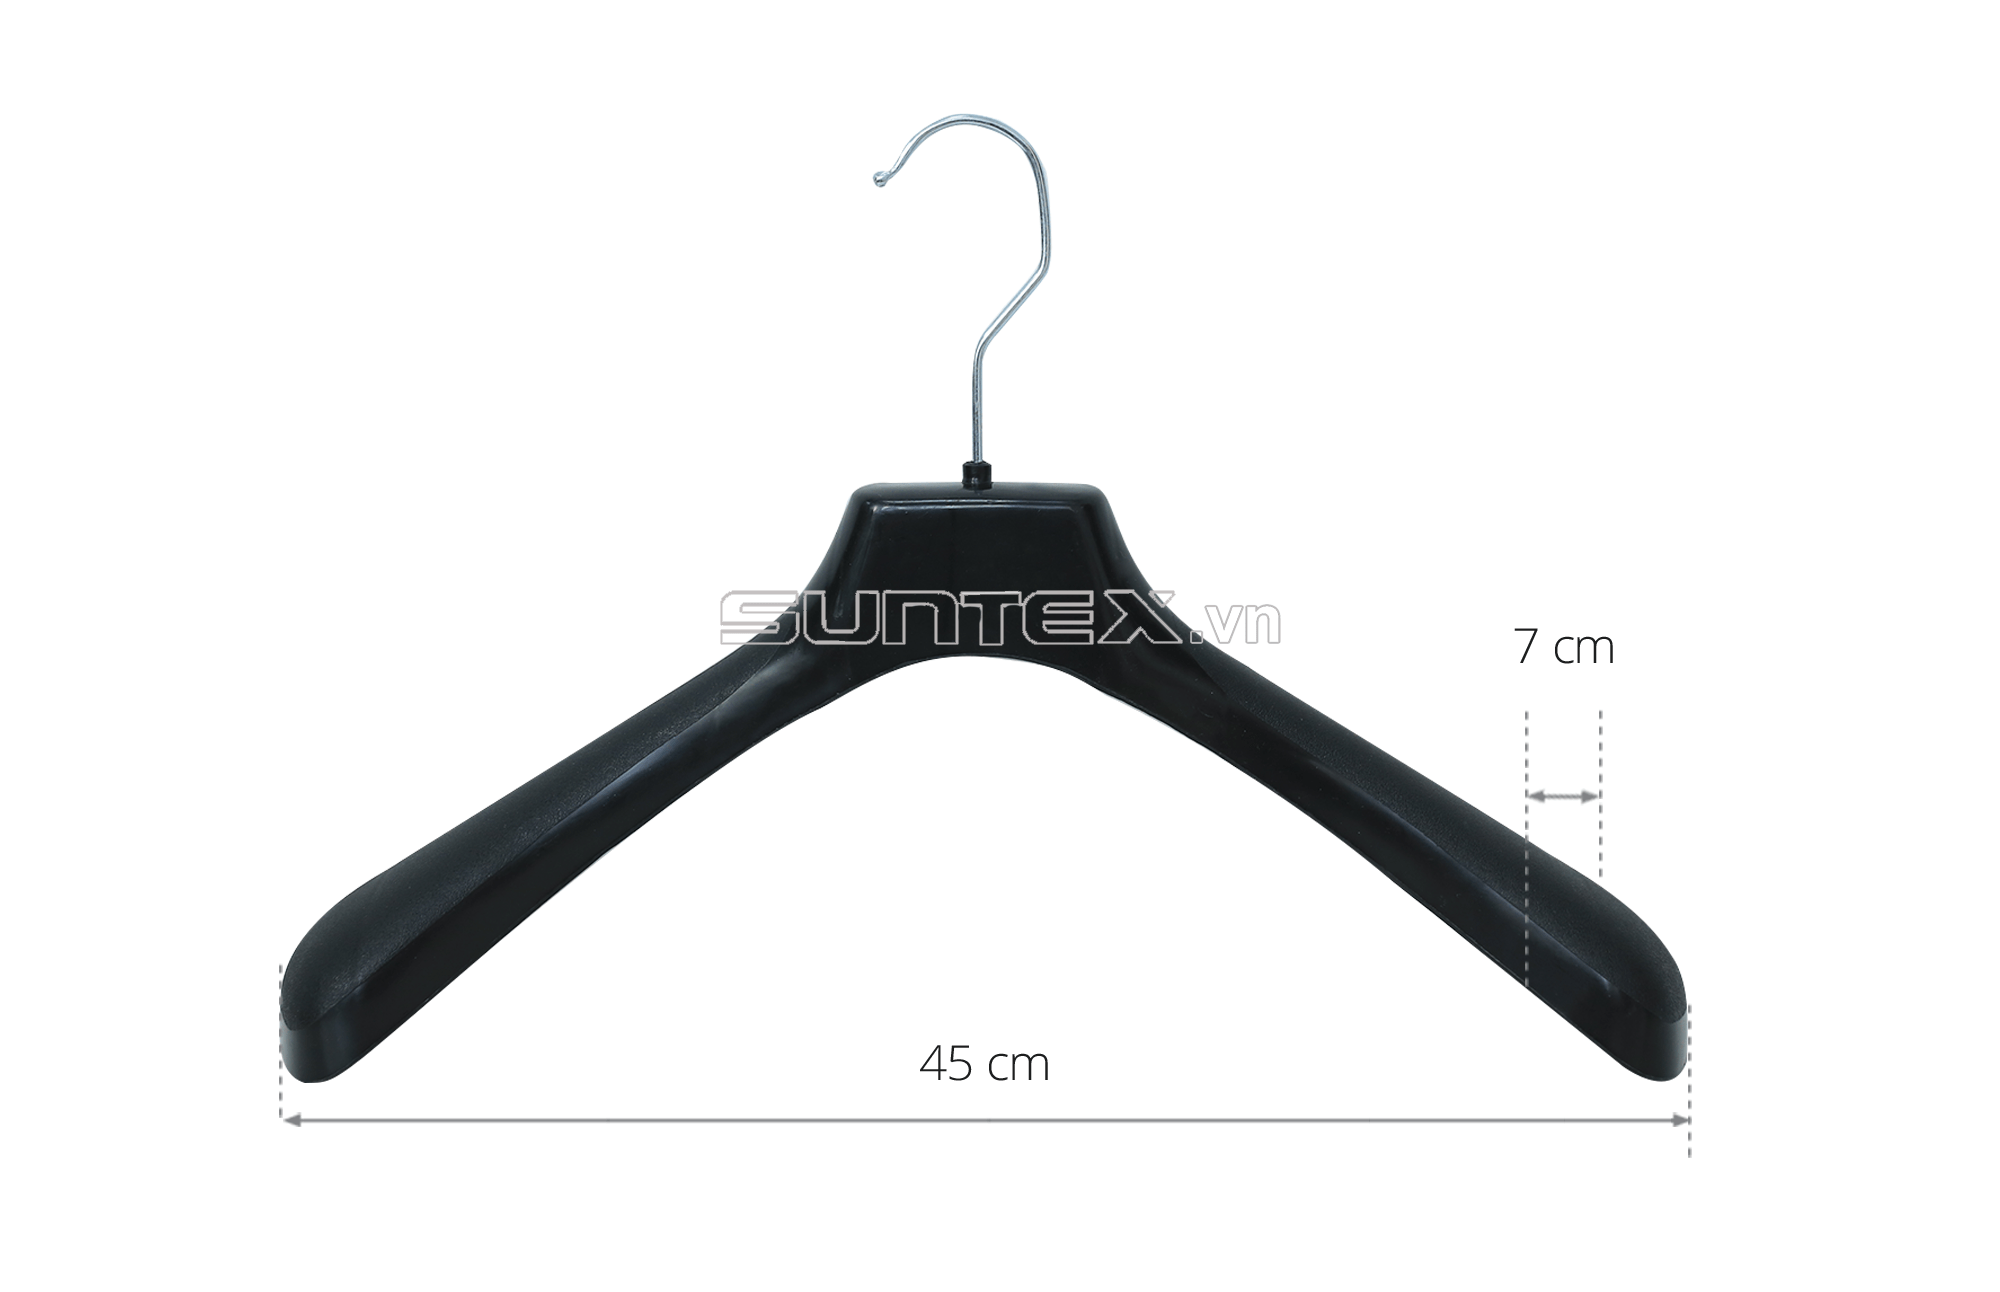 Hangers For Cloths Fast Delivery Suntex Wholesale Plastic Hangers Competitive Price Customized Anti-Slip Made In Vietnam 6